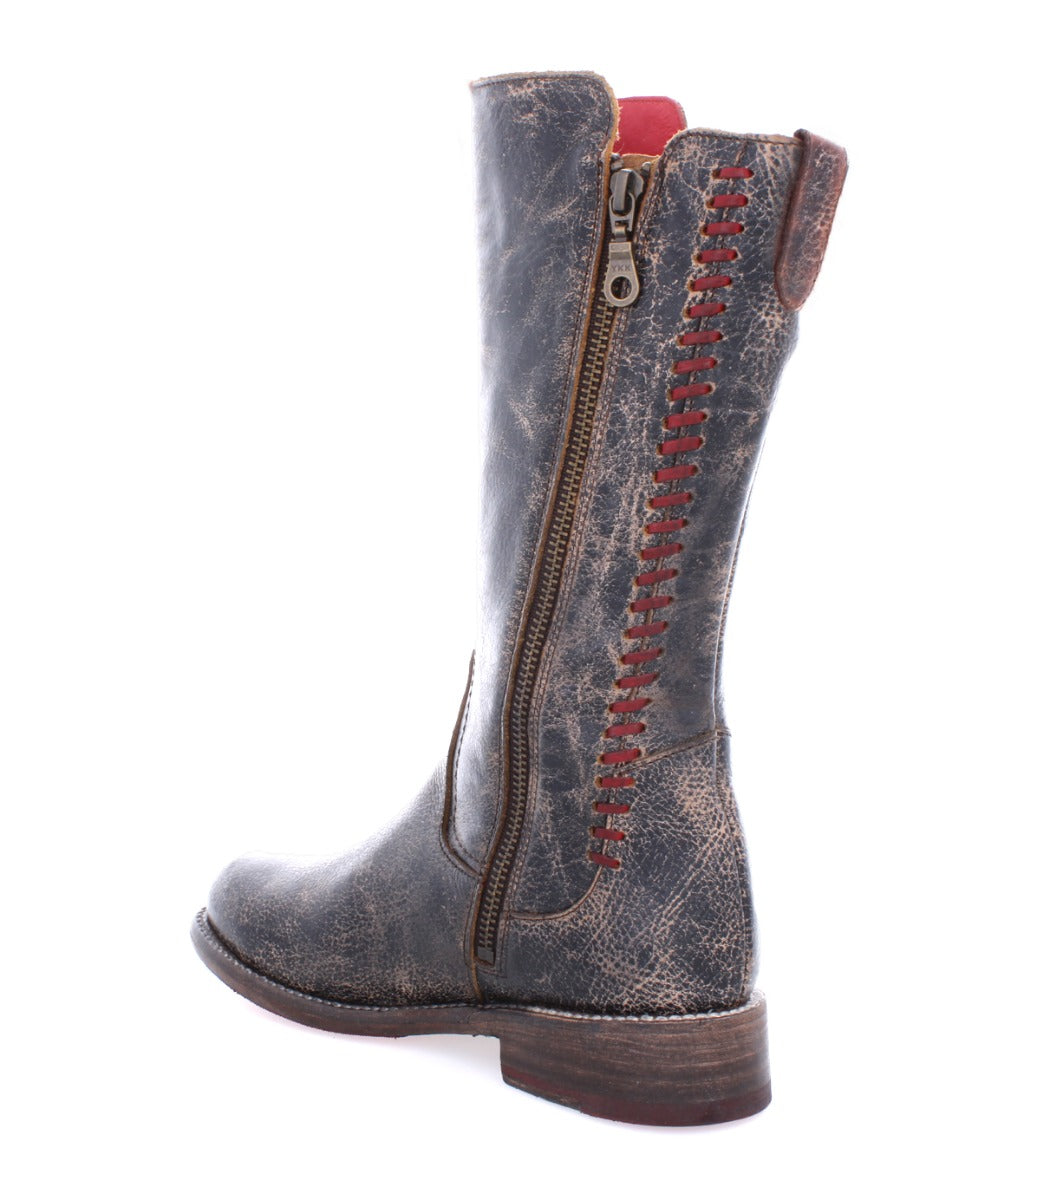 A Bed Stu Latifah women's boot with a zipper and red detailing.